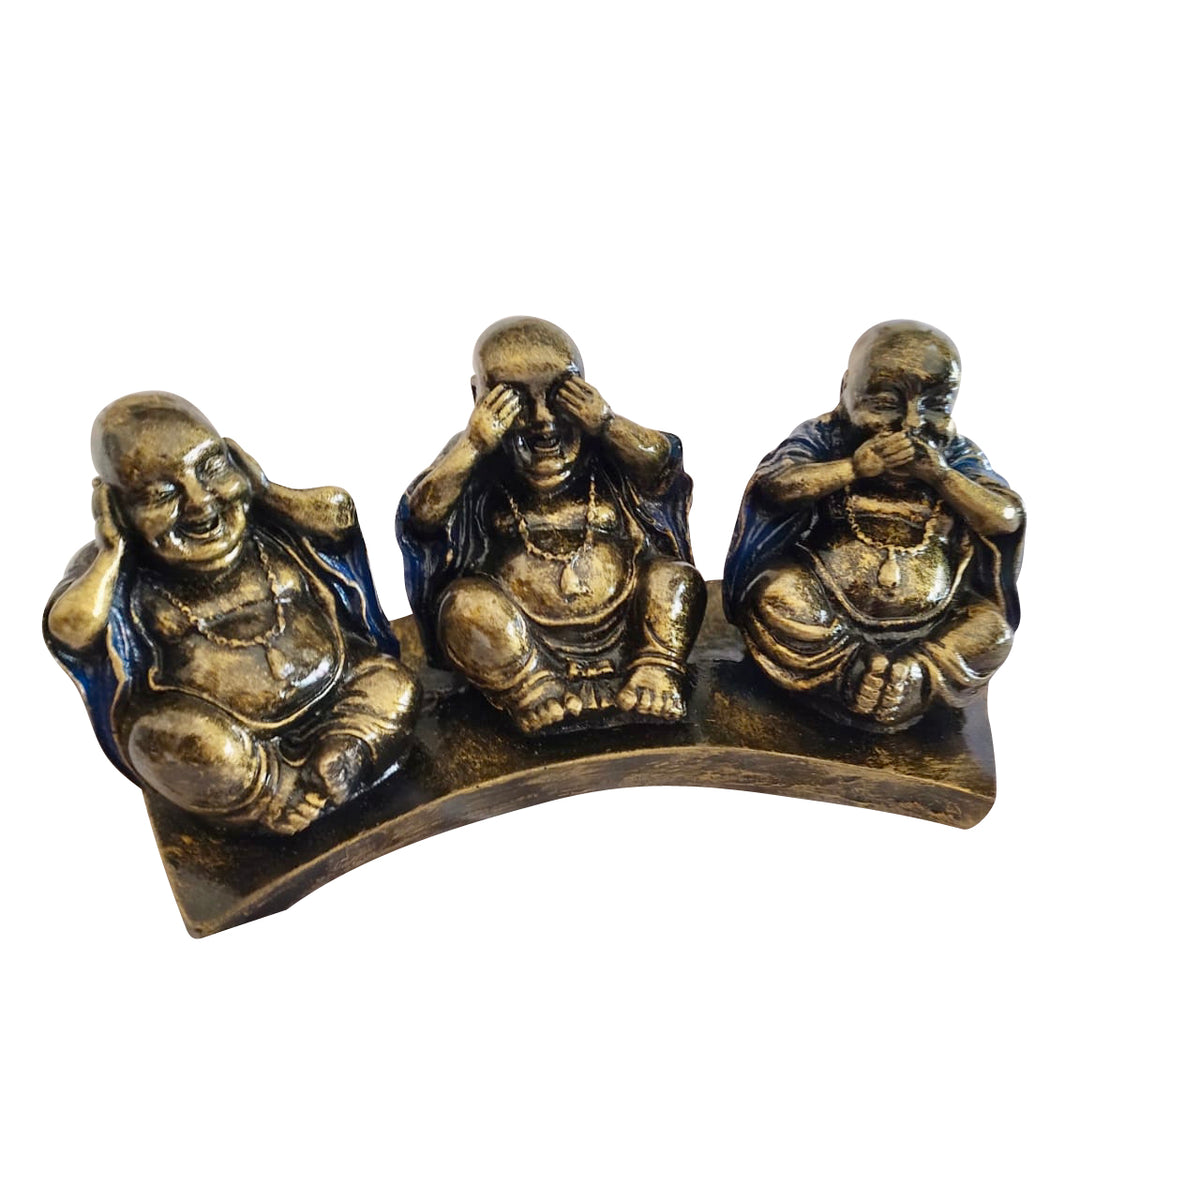 3 Wise Happy Buddhas, Hear See Speak No Evil, on Curved Base